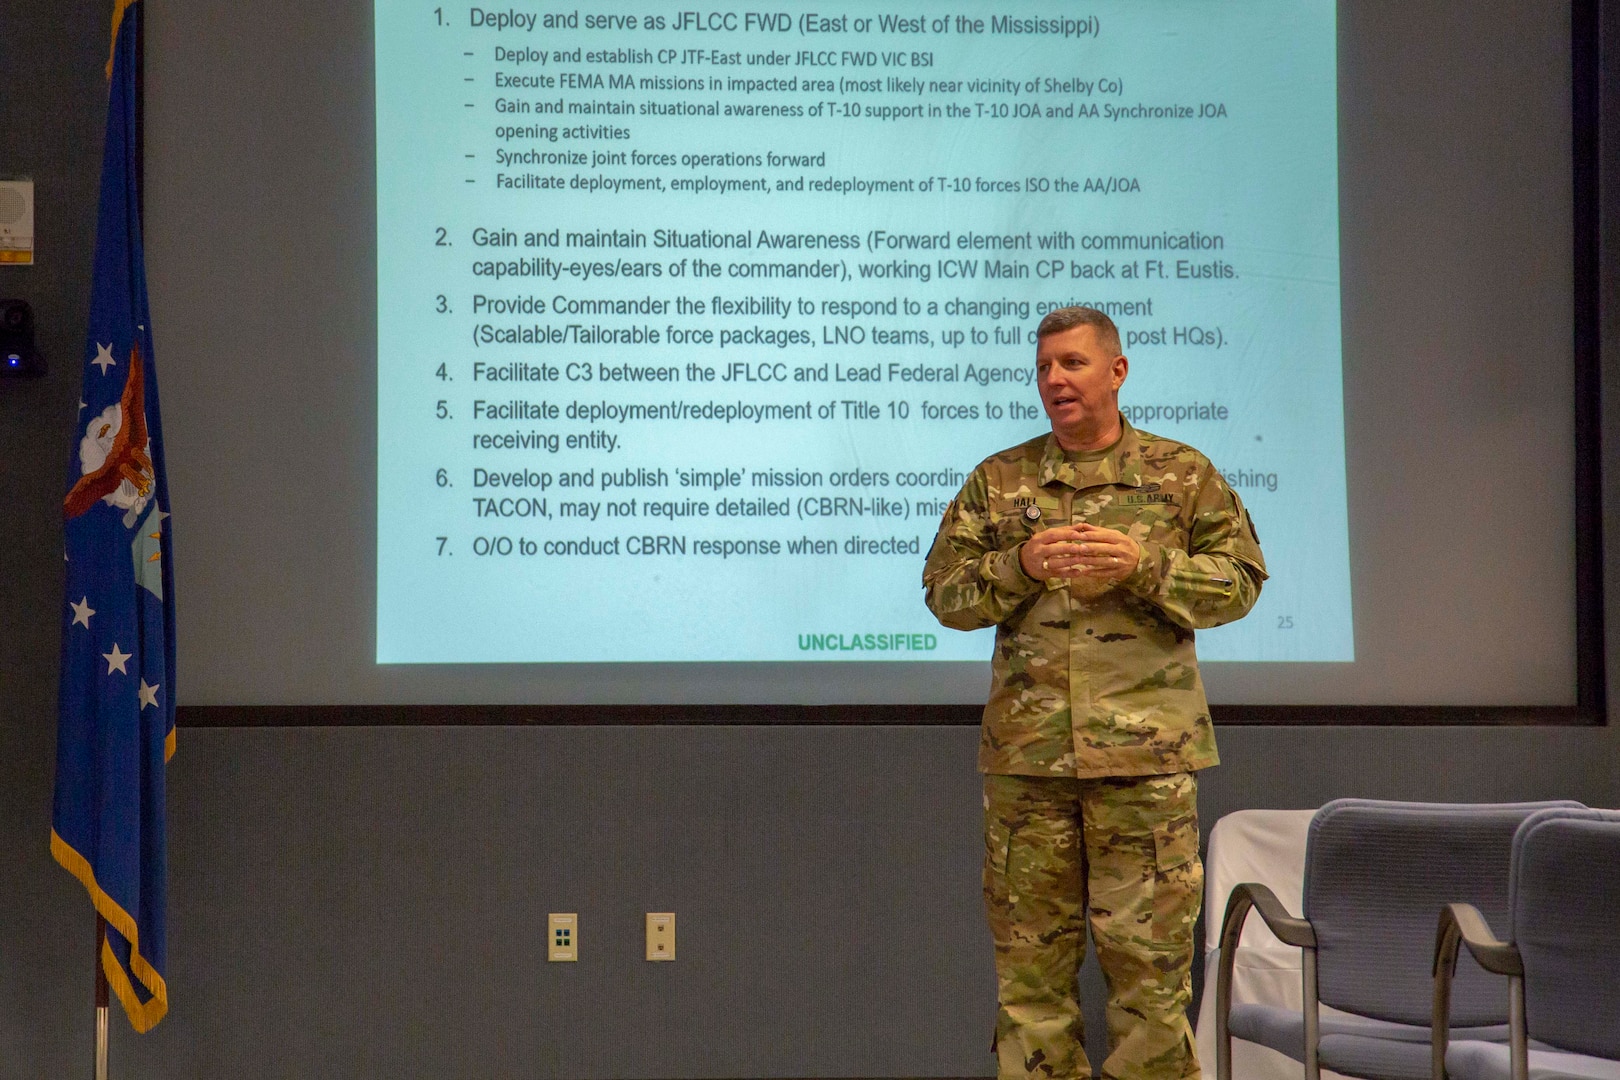 Maj. Gen. Bill Hall, commander, Joint Task Force Civil Support (JTF-CS) speaks to members of the command during a brief on exercise Ardent Sentry, which will take place June 3-7, 2019. The exercise will focus on a complex catastrophic earthquake along the New Madrid Seismic Zone (NMSZ) as part of Defense Support of Civil Authorities. When directed, JTF-CS is ready to respond in 24 hours to provide command and control of 5,200 federal military forces located at more than 36 locations throughout the nation acting in support of civil authority response operations to save lives, prevent further injury, and provide critical support to enable community recover. (Official DoD photo by Mass Communication Specialist 3rd Class Michael Redd/released)